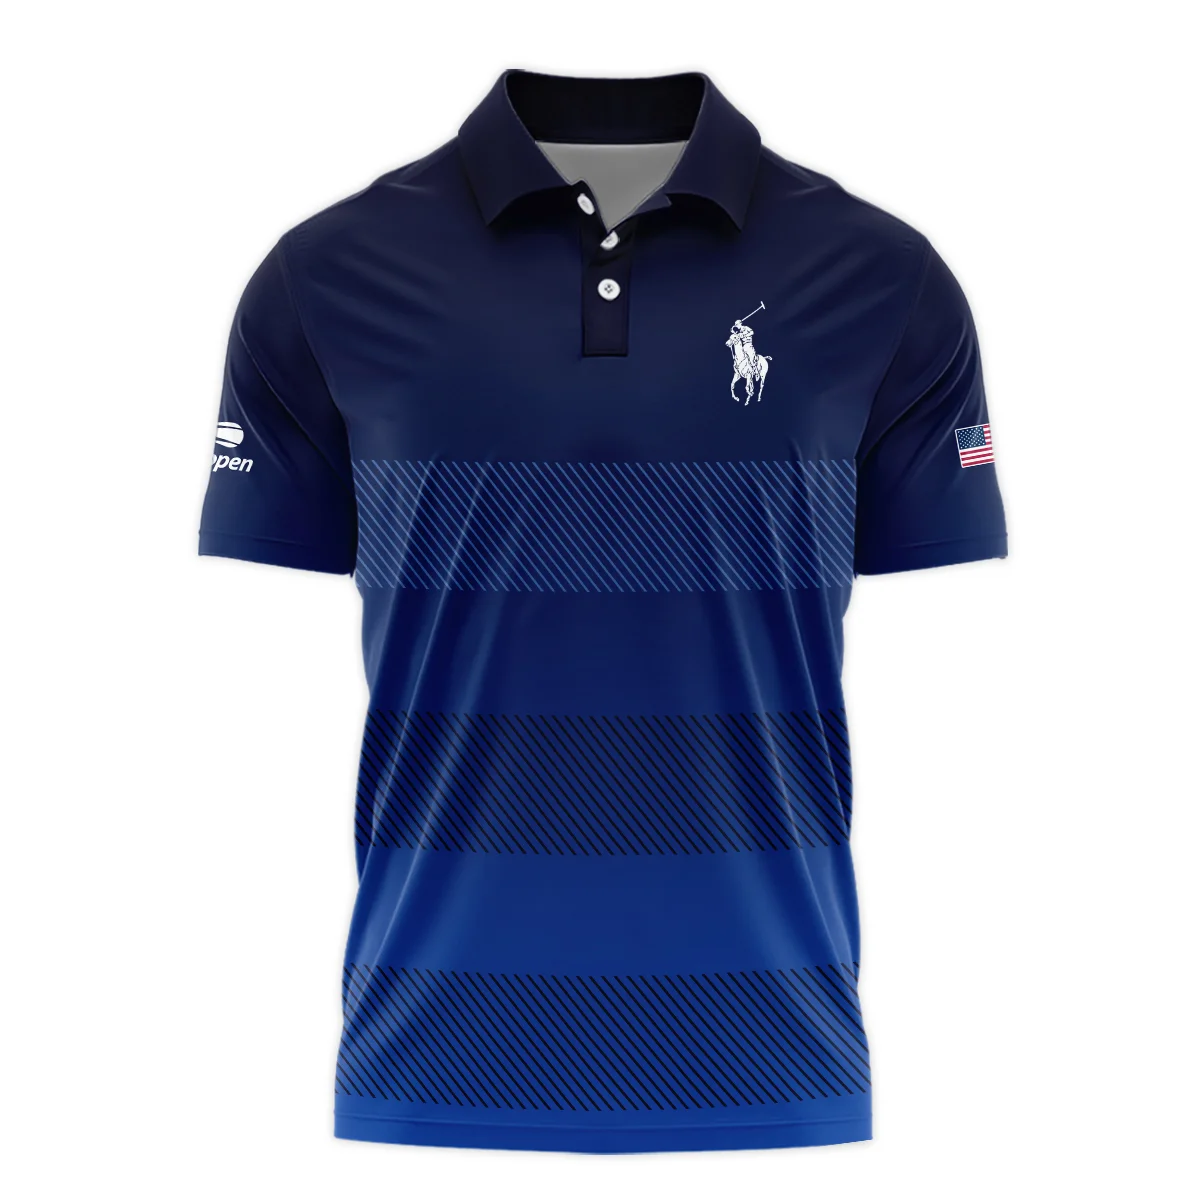 Straight Line Dark Blue Background US Open Tennis Champions Ralph Lauren Polo Shirt Style Classic Polo Shirt For Men